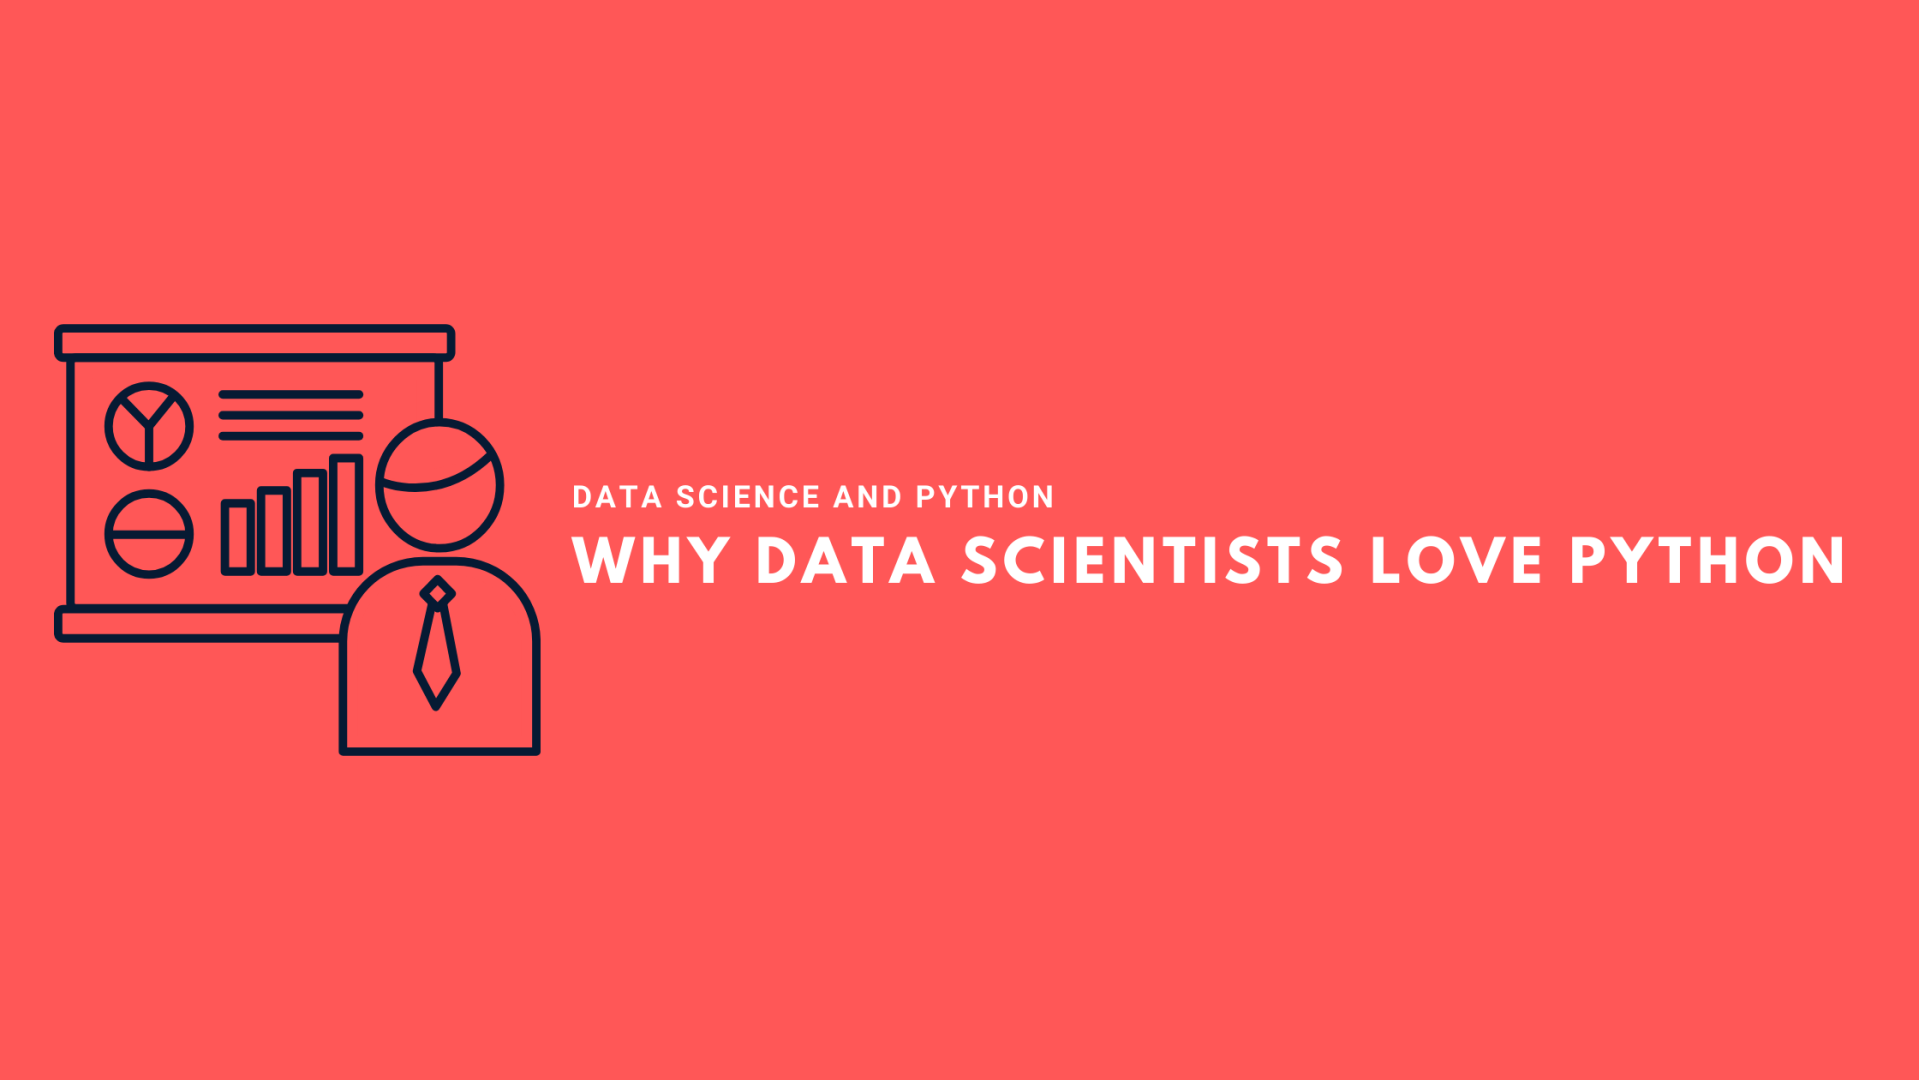 Data Science and Python: Why Data Scientists Love Python